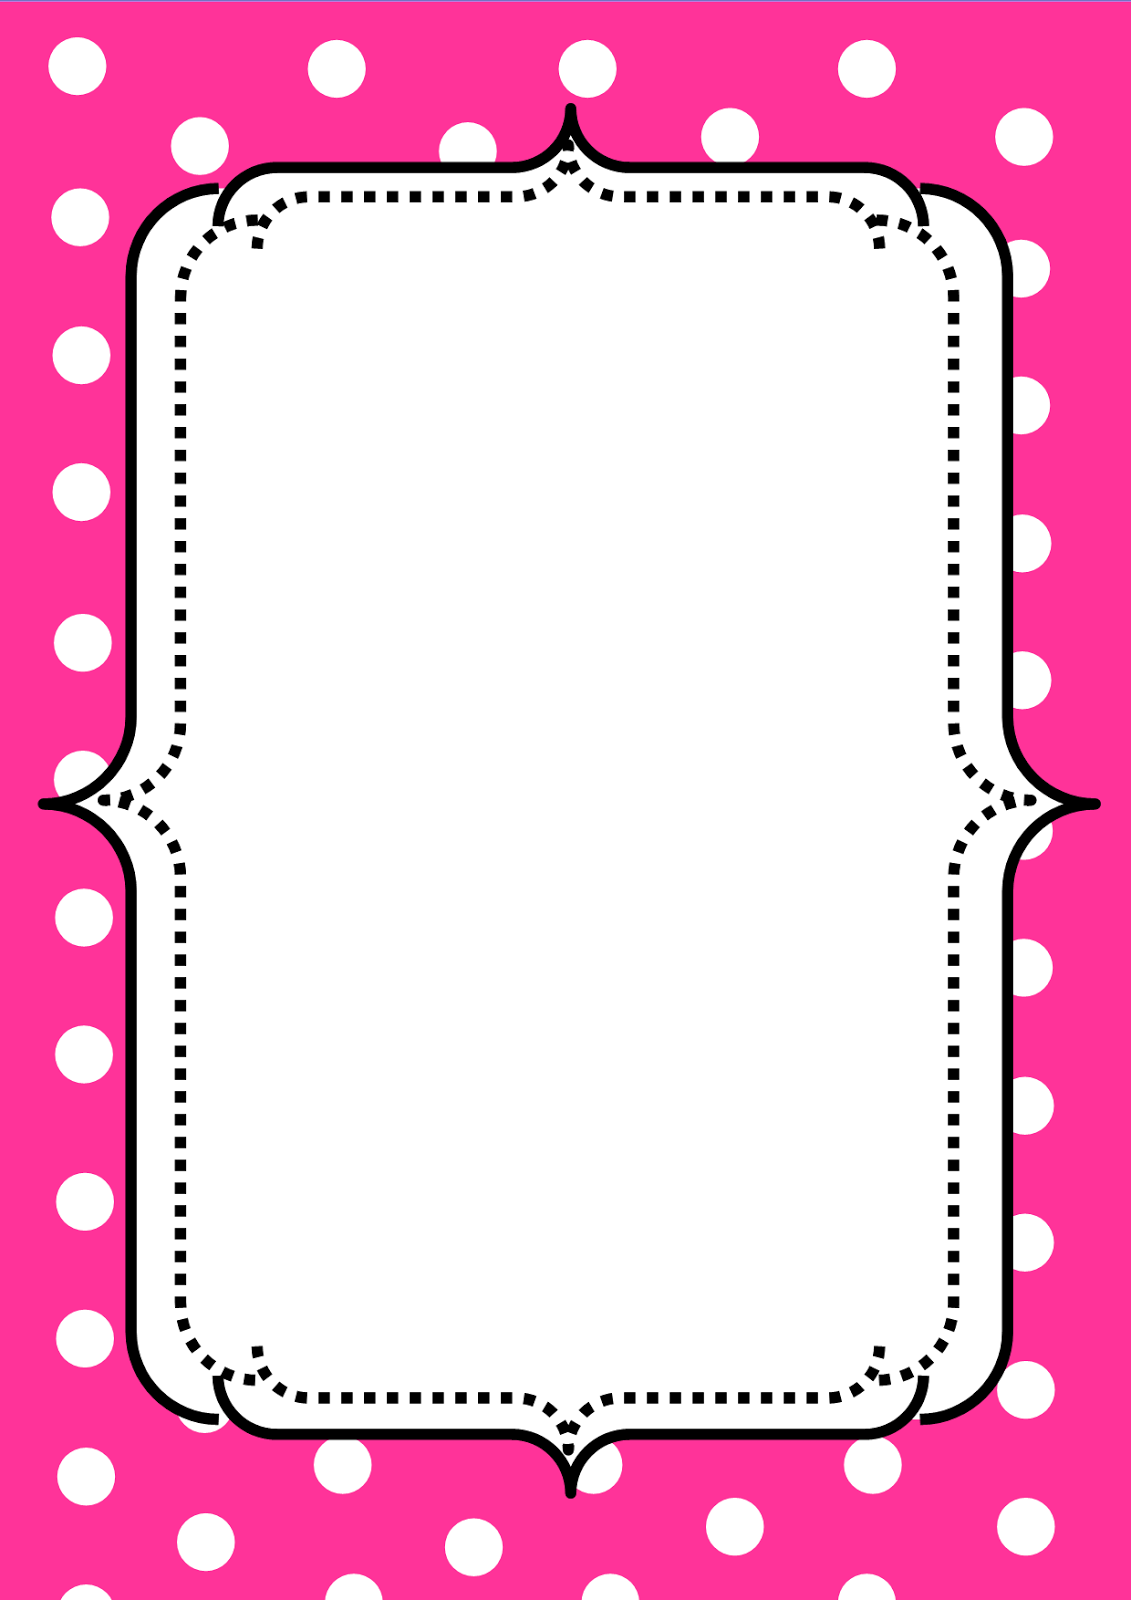 Pink border clipart 